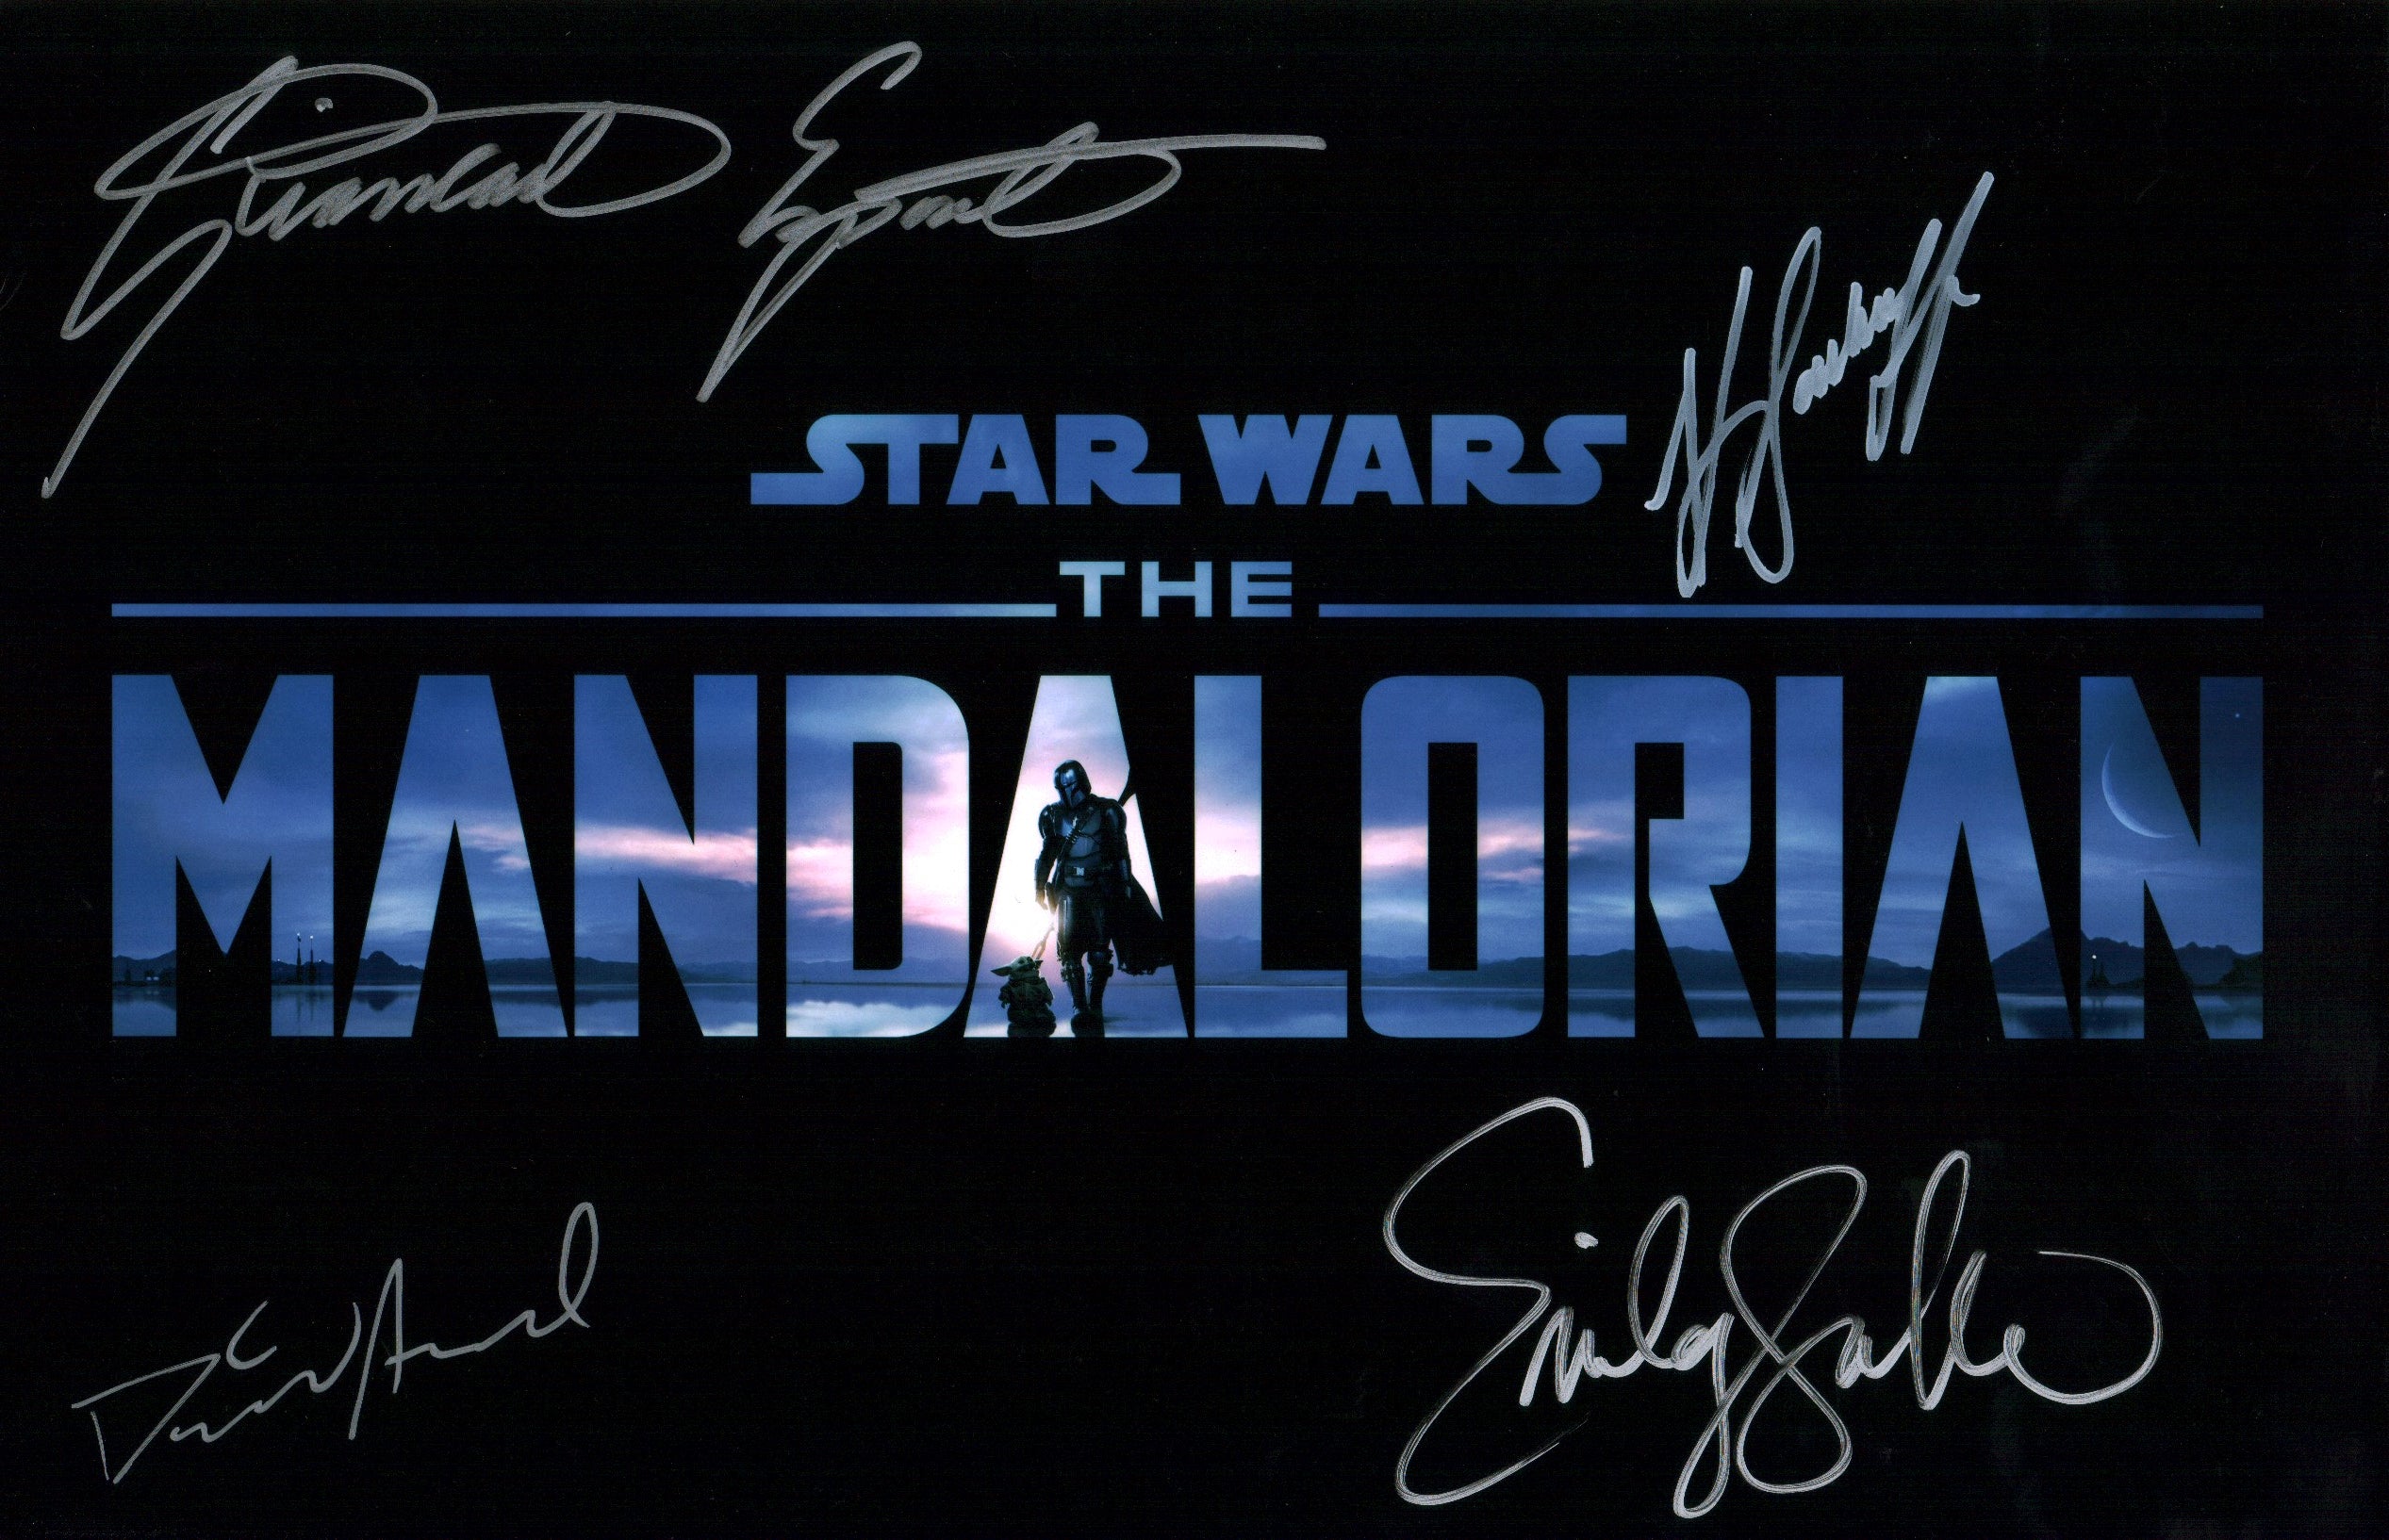 Star Wars The Mandalorian 11x17 Photo Poster Signed Autograph Acord Esposito Sackhoff Swallow JSA Certified COA